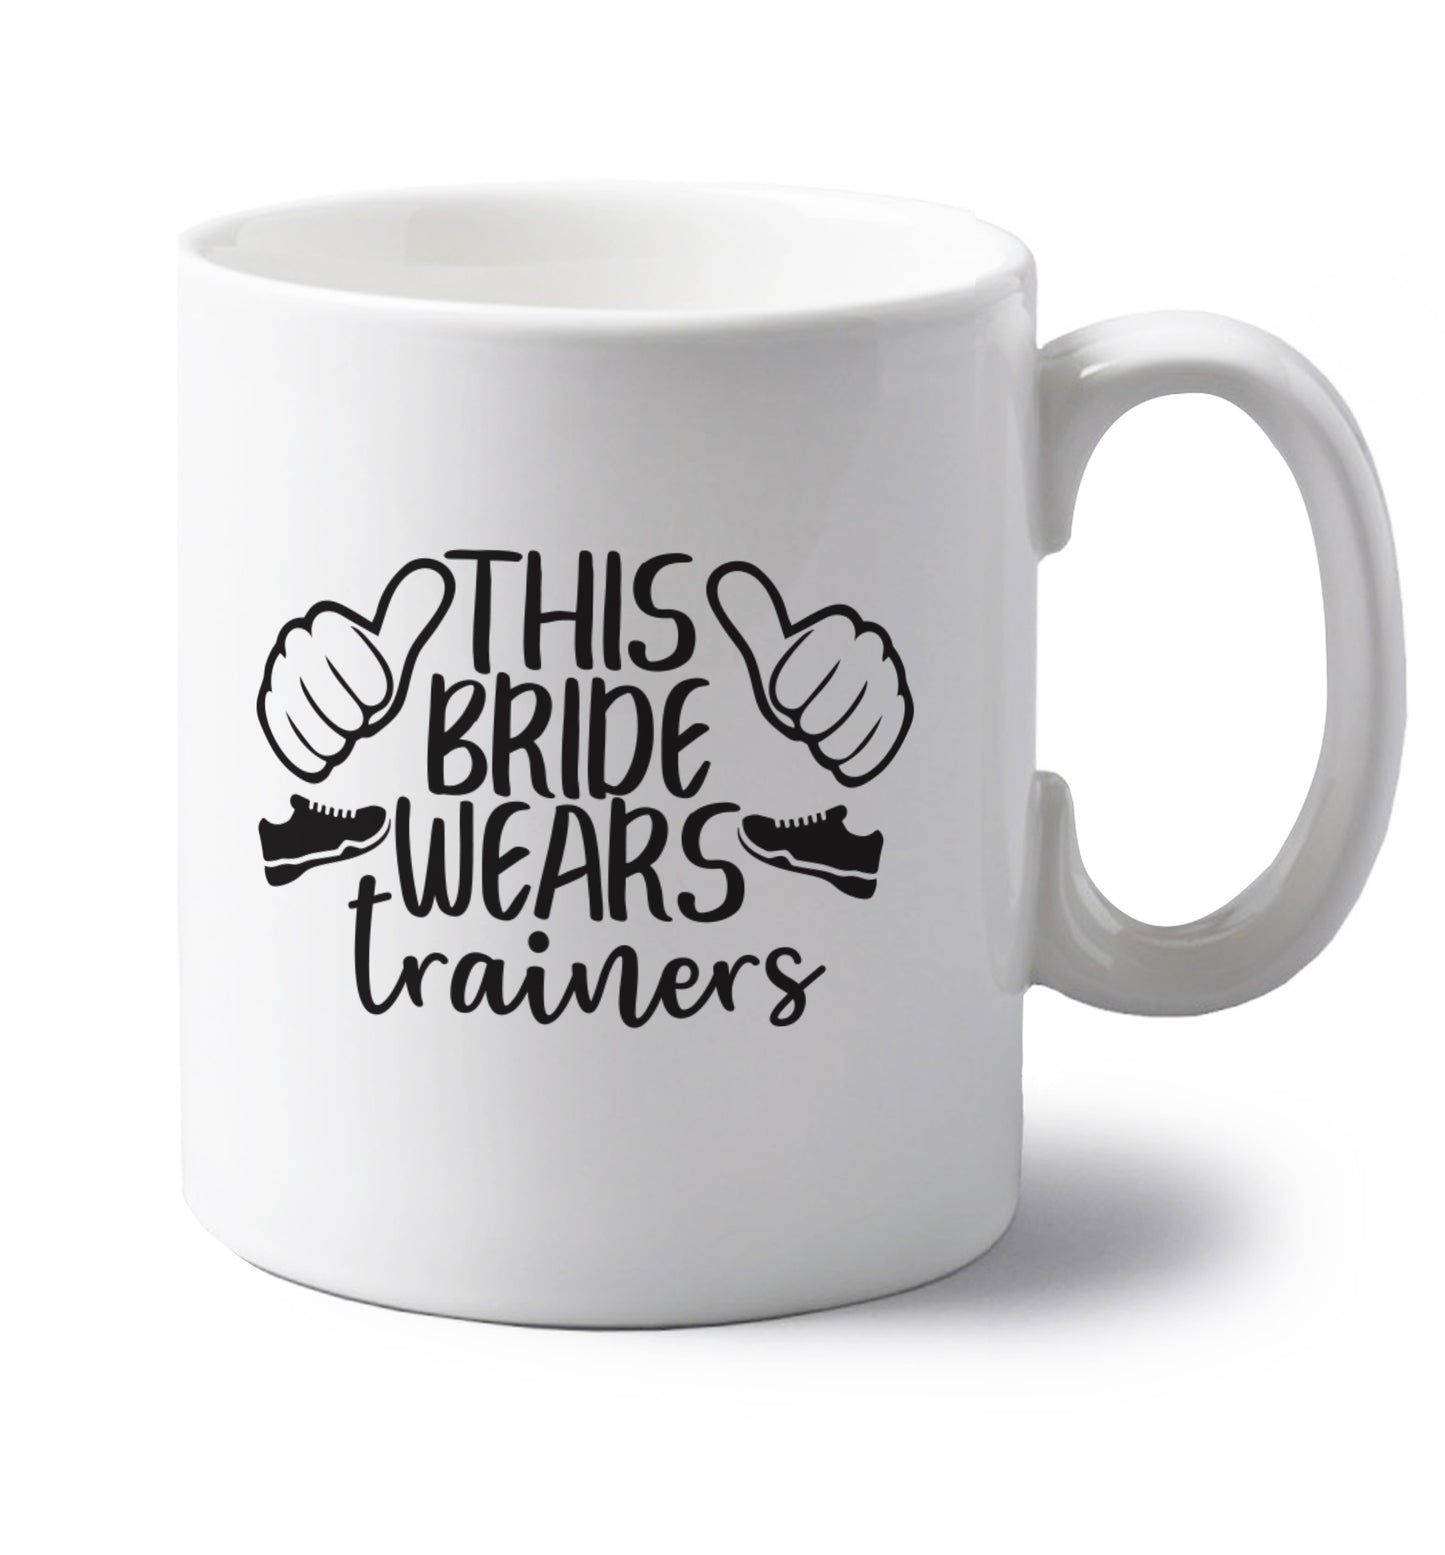 This bride wears trainers left handed white ceramic mug 